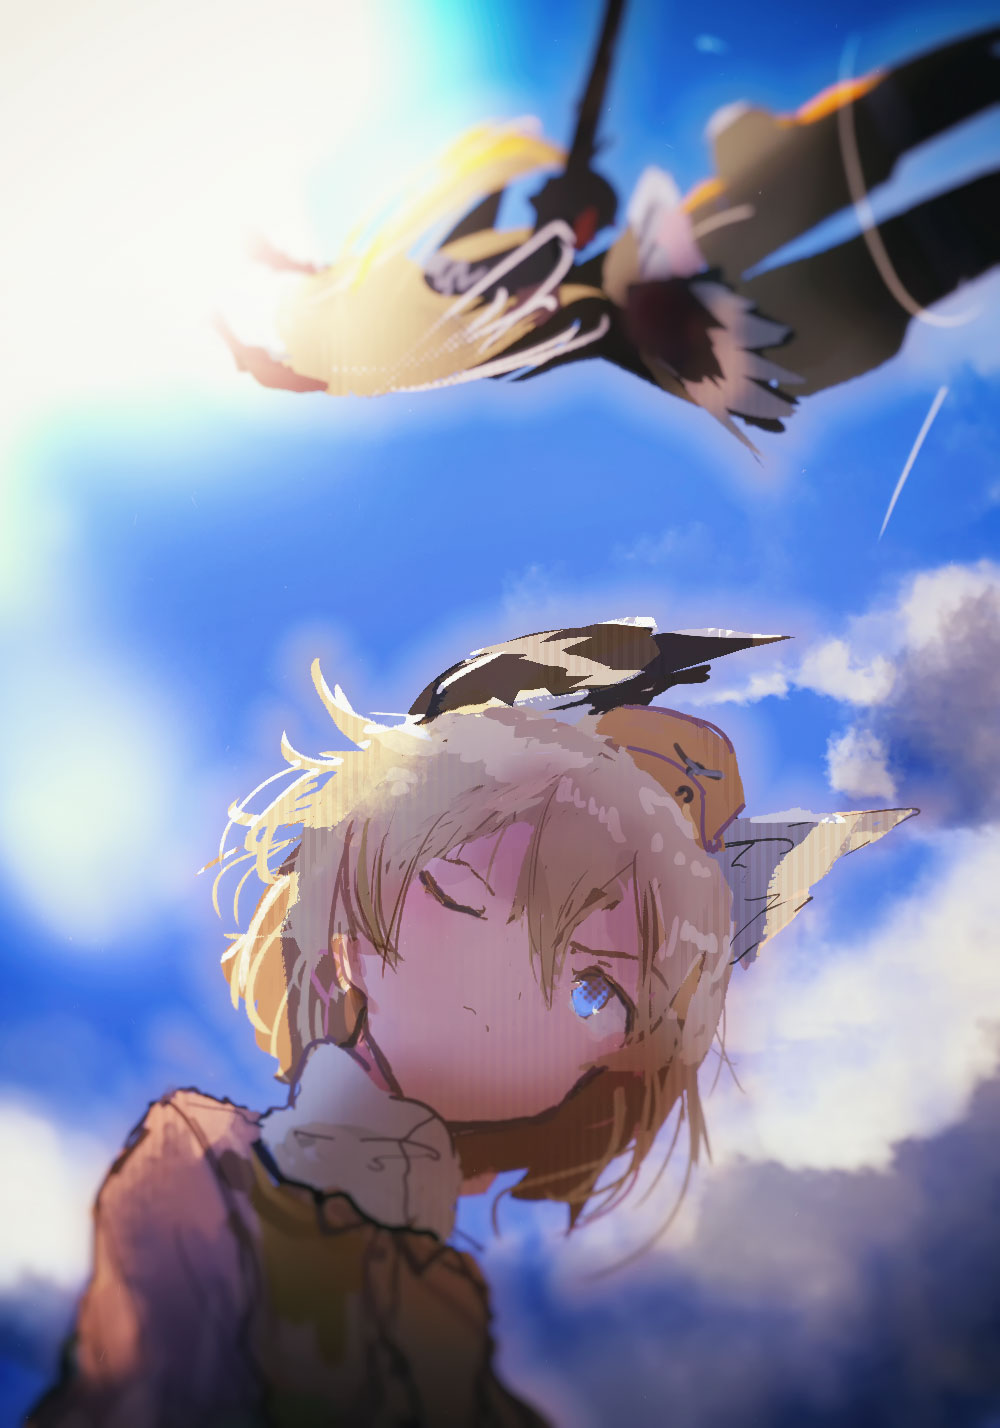 2girls blonde_hair blue_eyes blurry clouds condensation_trail flying from_below frown garrison_cap hanna-justina_marseille hat head_wings highres kabuyama_kaigi lens_flare long_hair military military_uniform multiple_girls one_eye_closed raisa_pottgen scarf short_hair sketch sky strike_witches striker_unit sun tail_feathers uniform world_witches_series